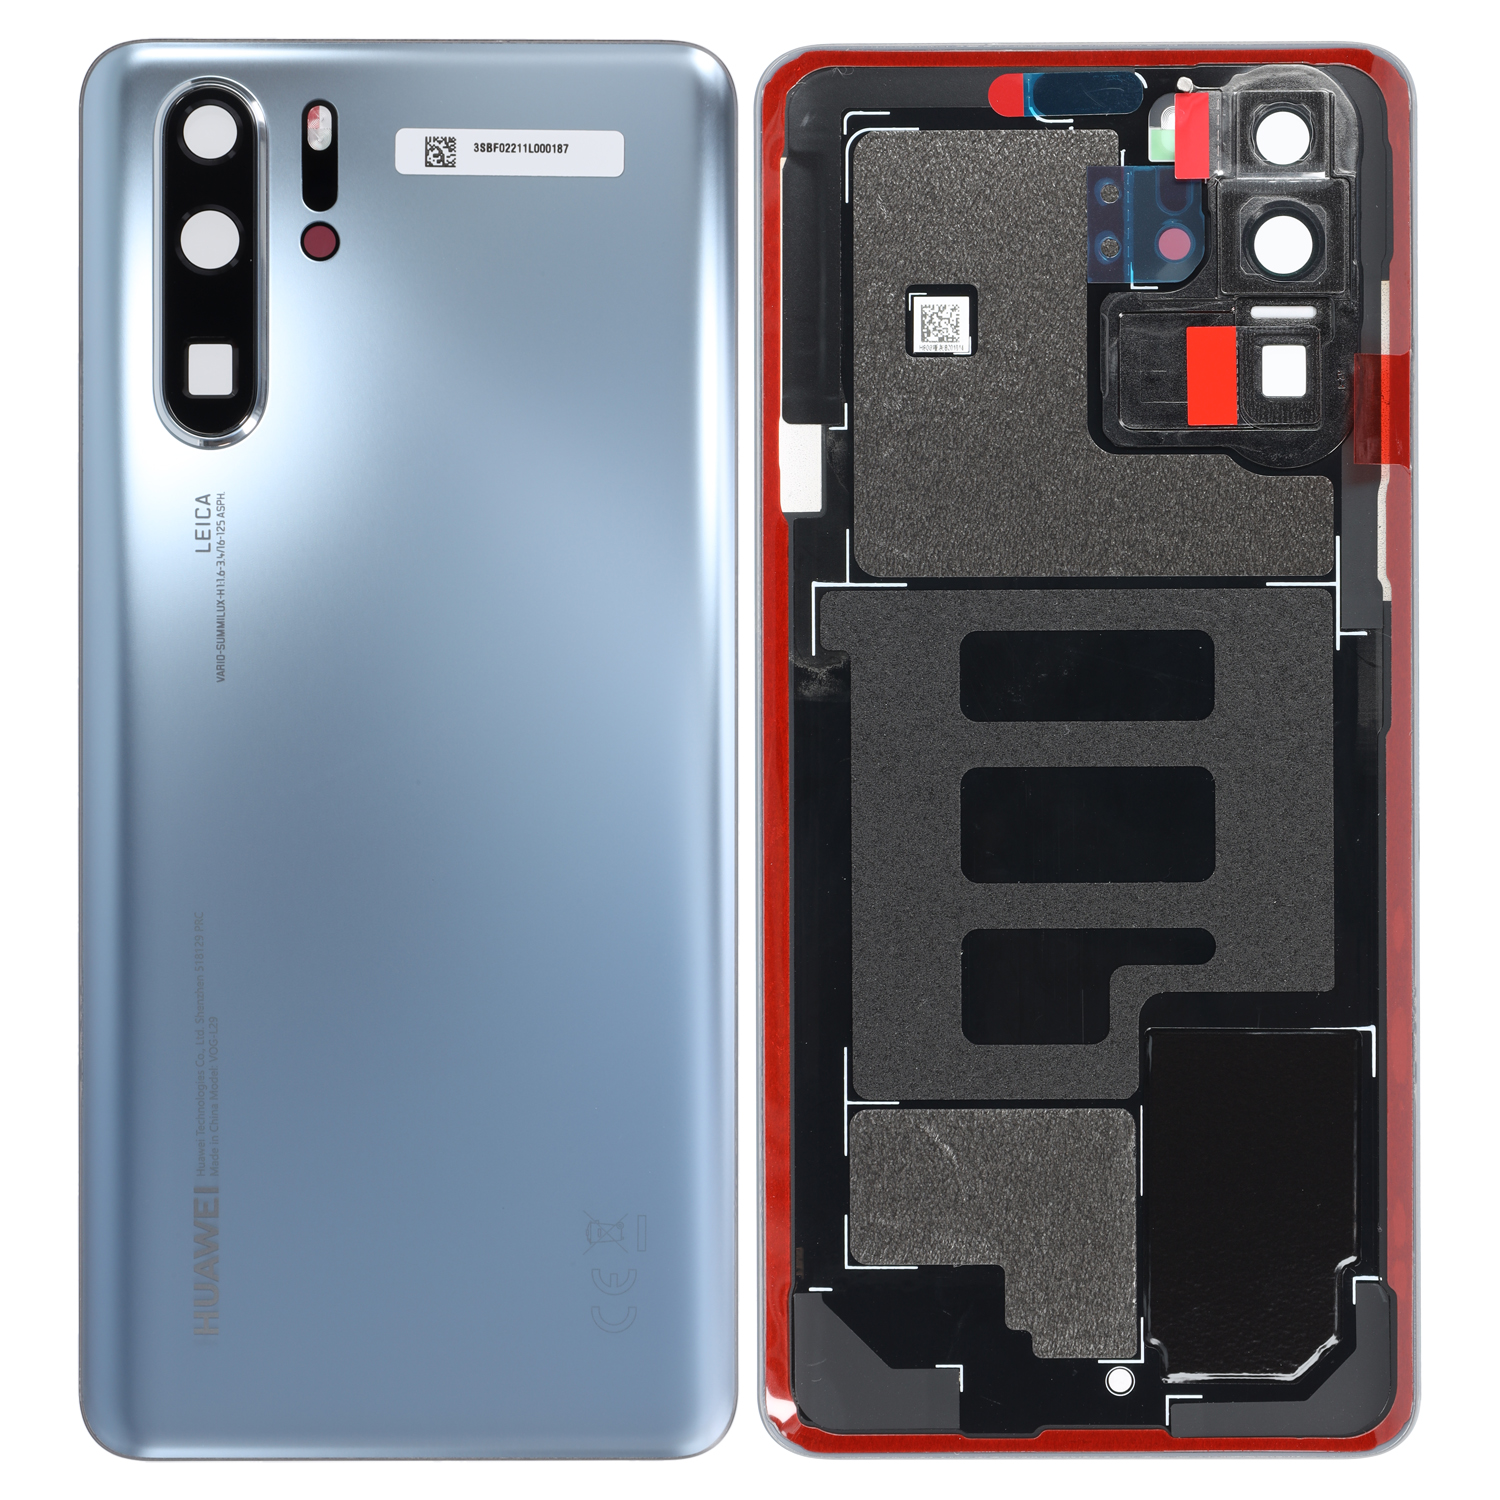 Huawei P30 Pro (VOG-L29) NEW EDITION Battery Cover, Silver Frost (ServicePack)